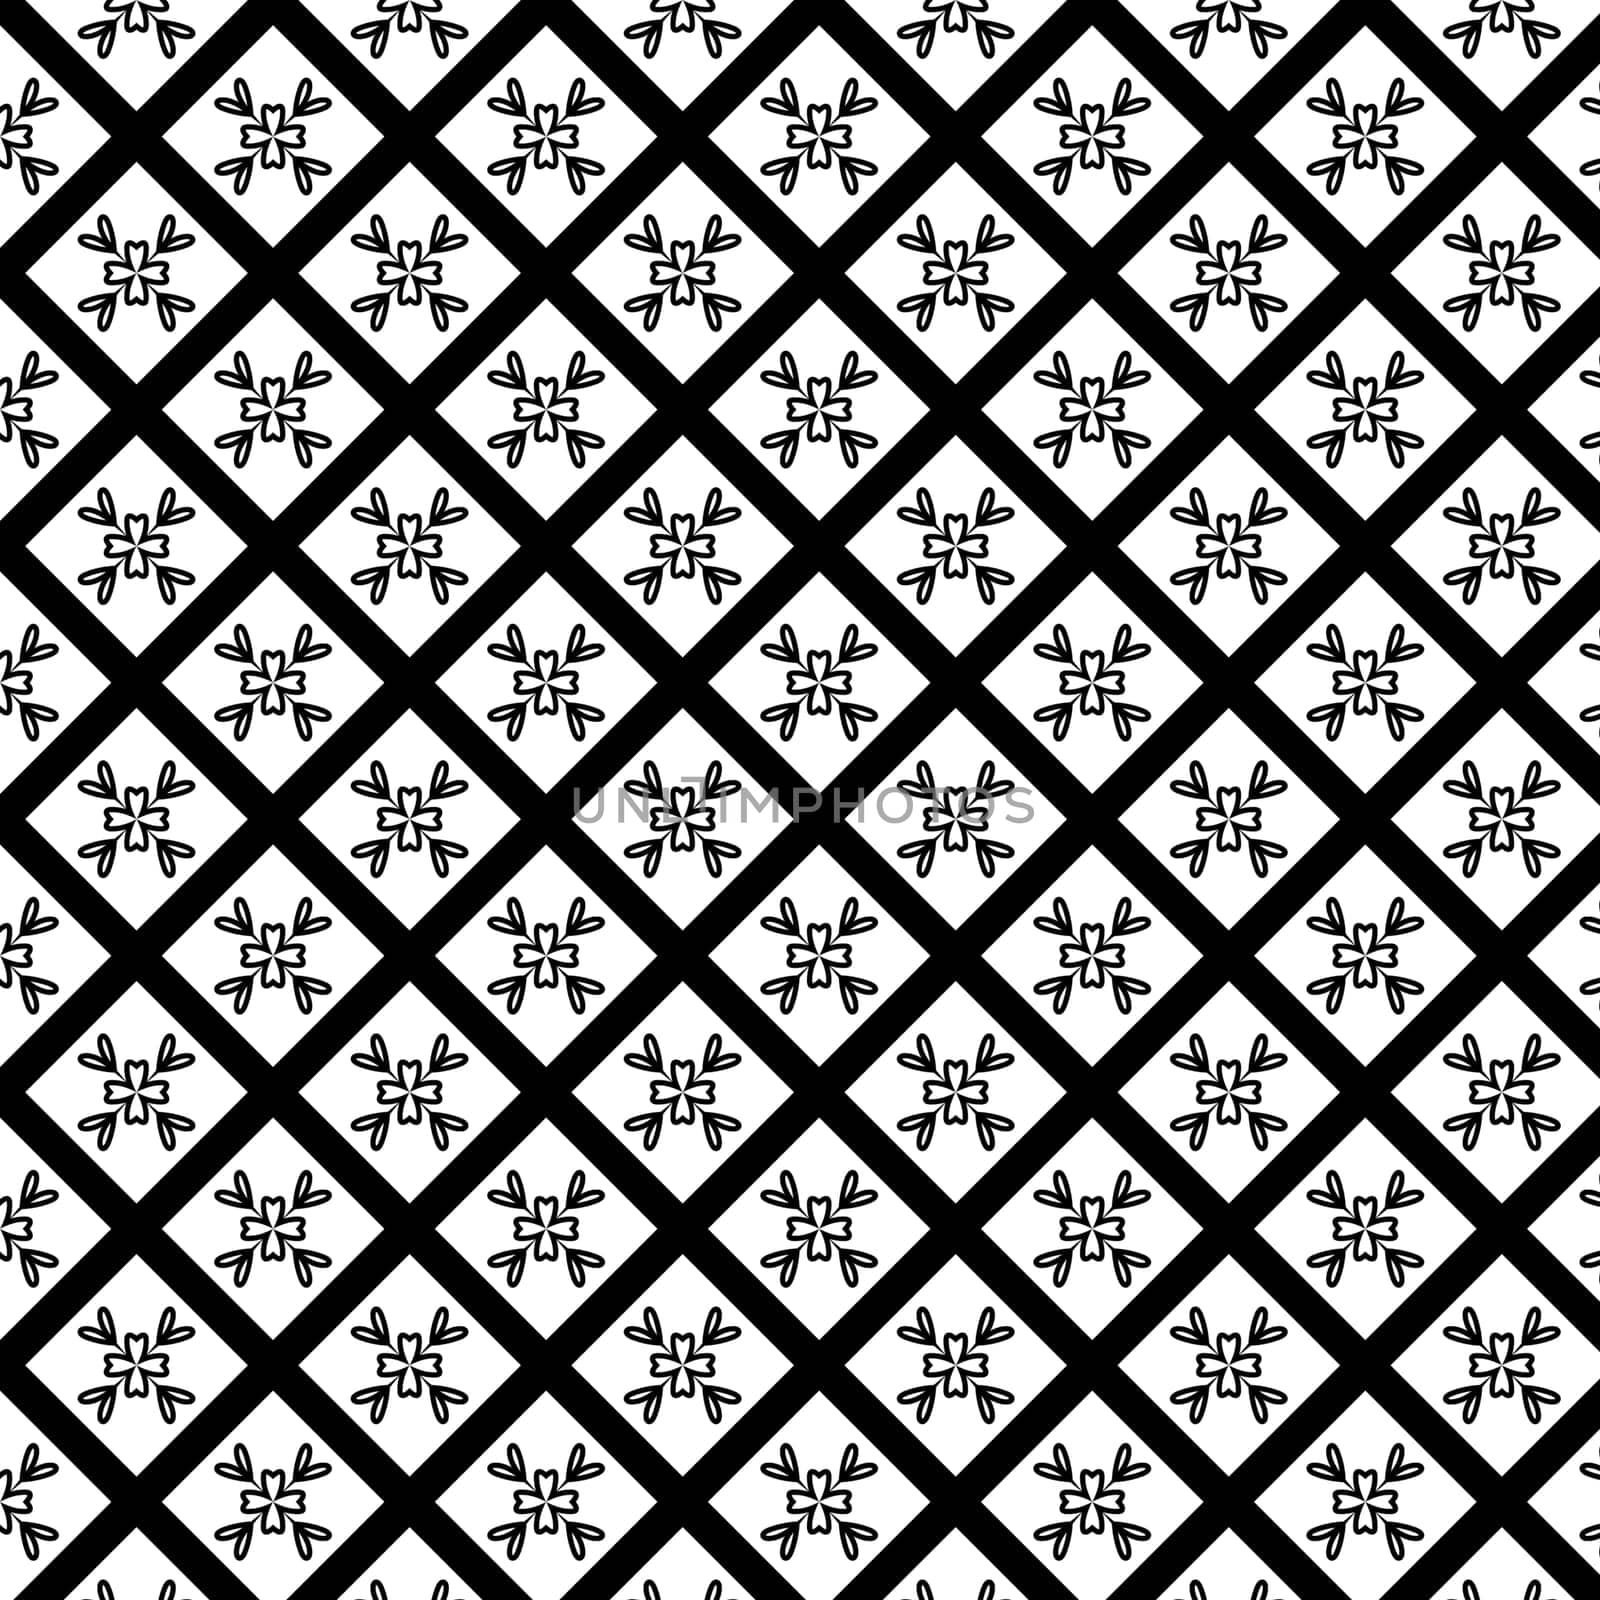 Abstract geometric shape pattern with black and white colour for background by iamnoonmai